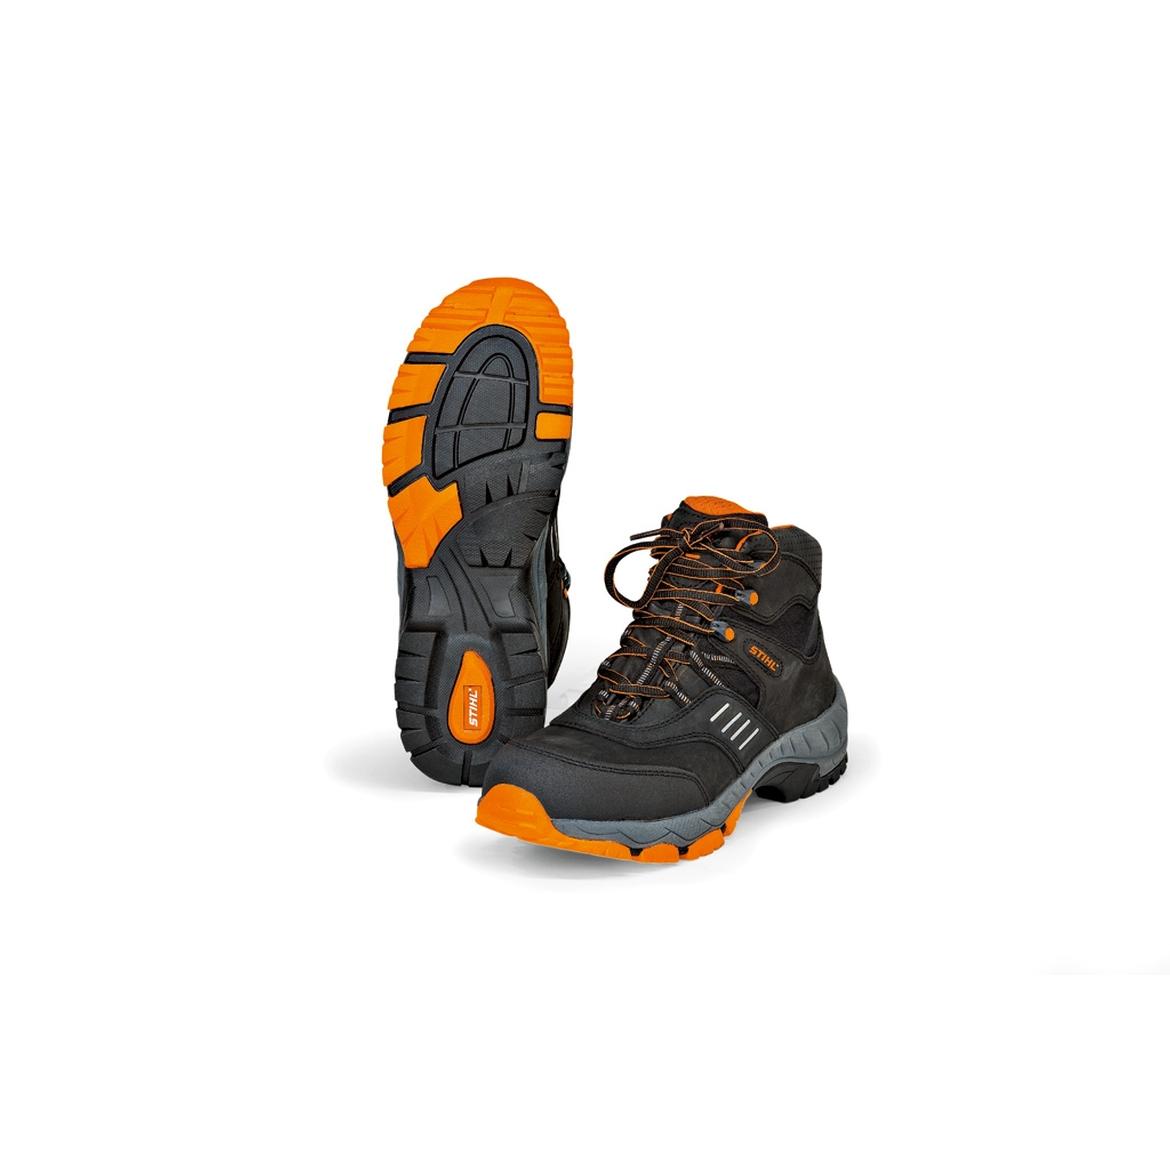 s3 safety boots uk